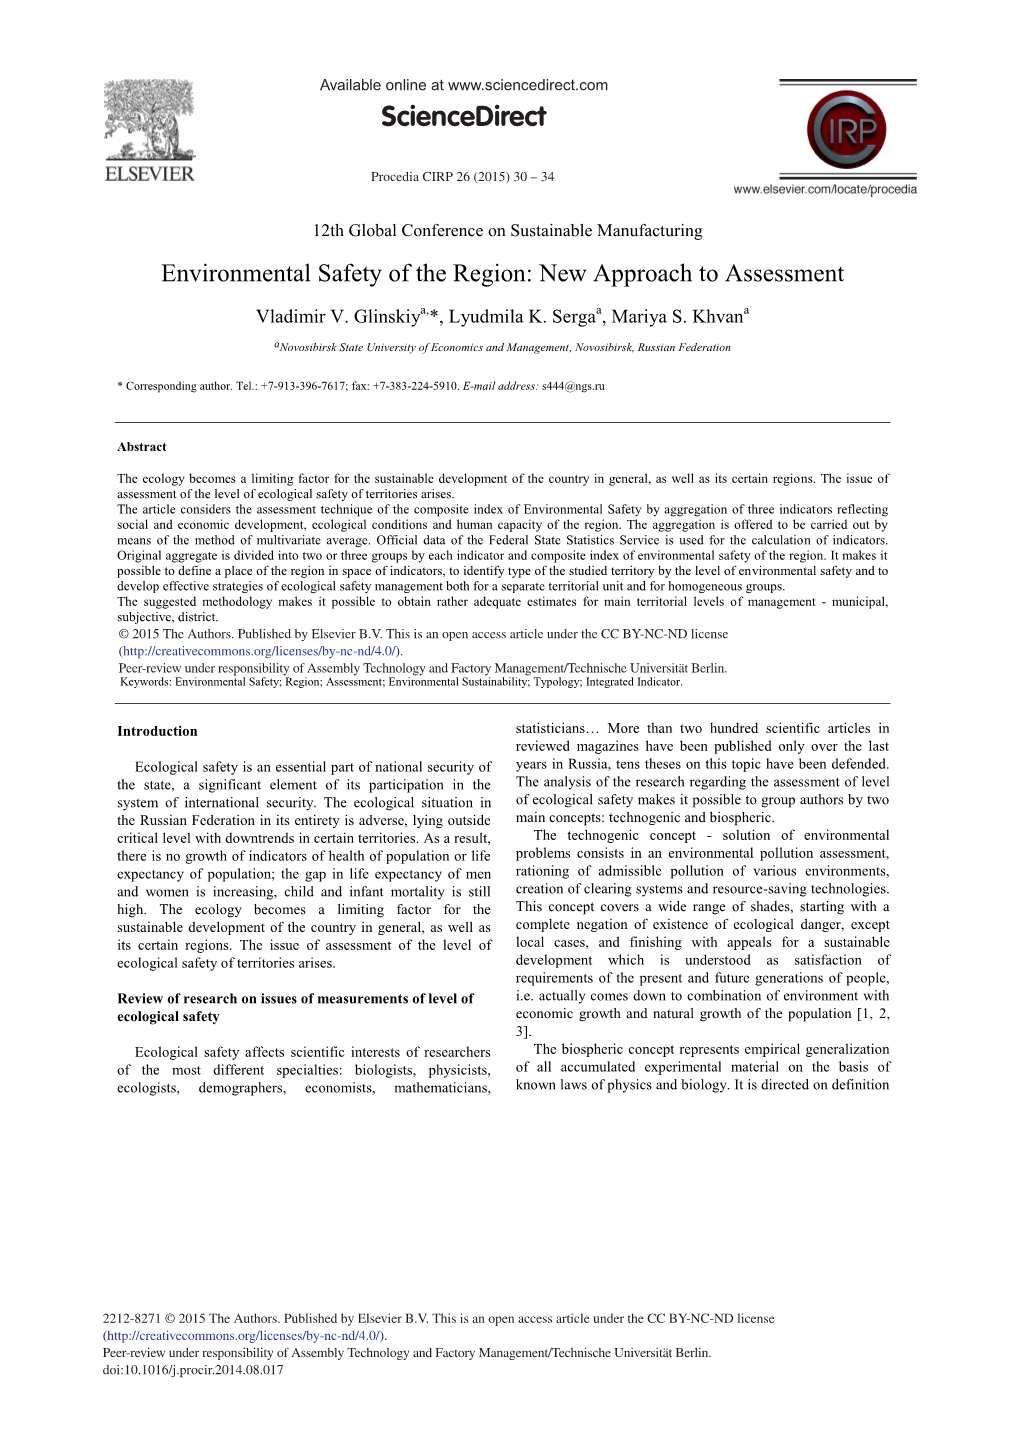 Environmental Safety of the Region: New Approach to Assessment